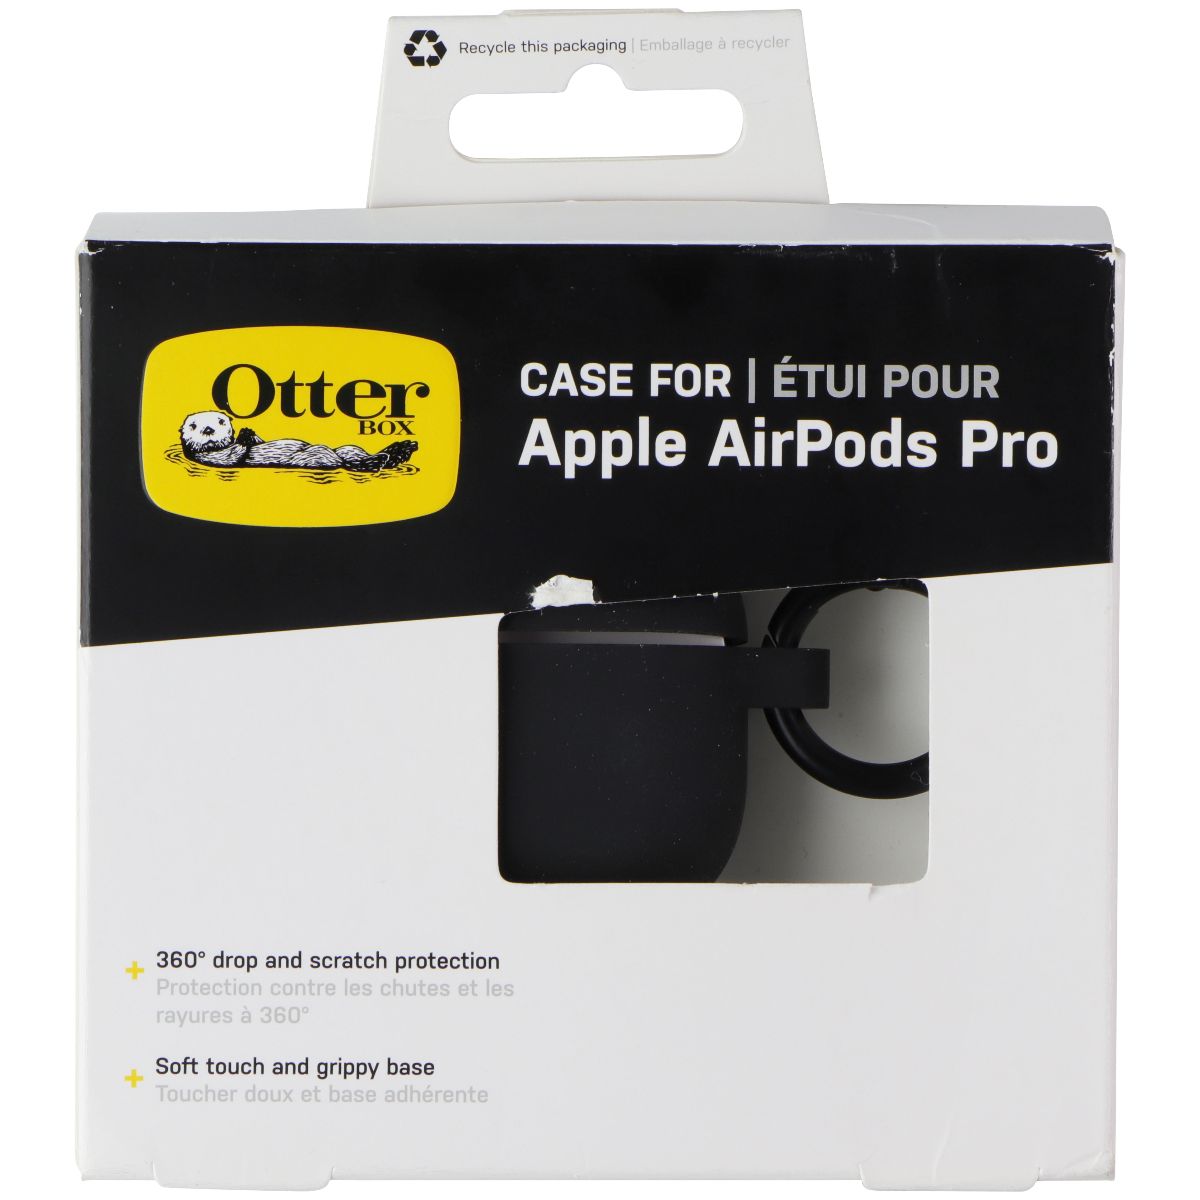 OtterBox Silicone Case for Apple AirPods Pro - Black